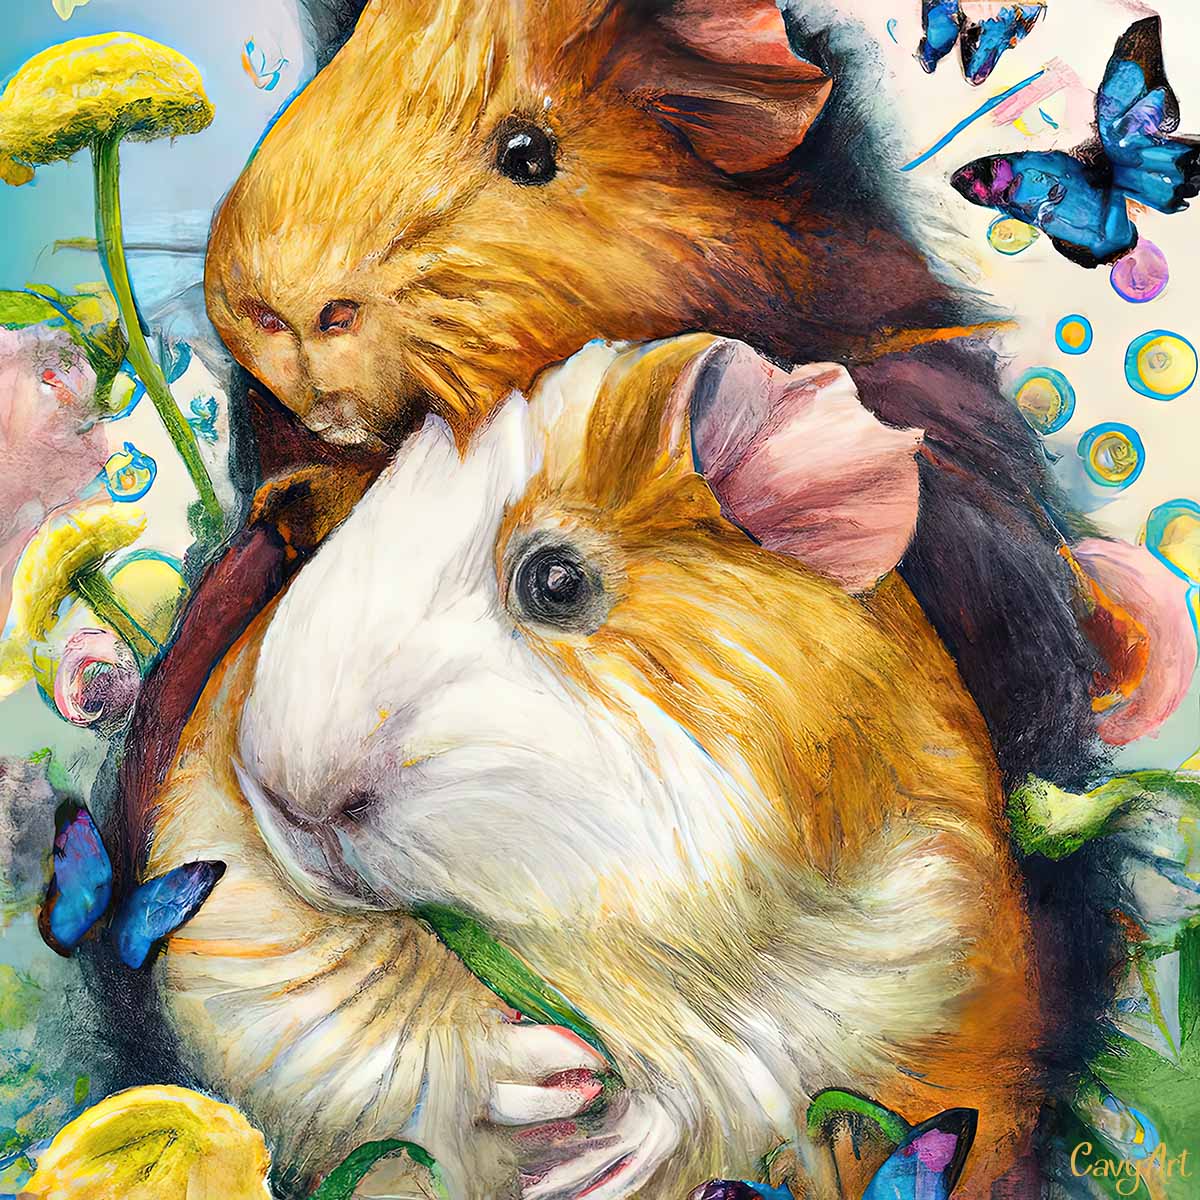 Pretty Guinea pigs suggling Illustration from CavyArt